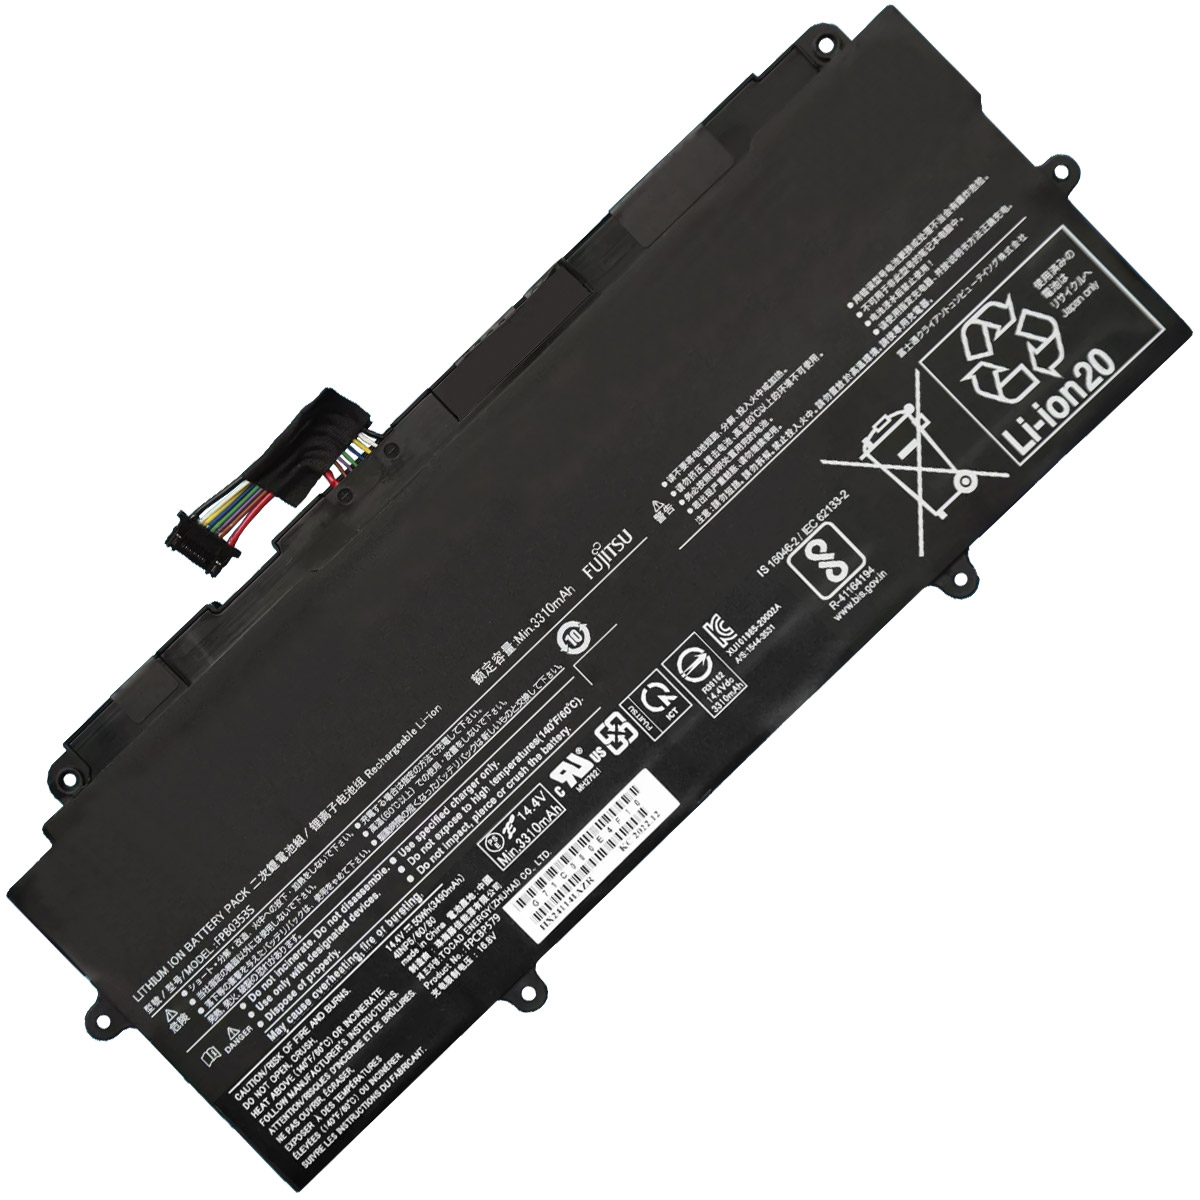 FUJITSU Uniwill-FPB0353S/FPCBP579-Laptop Replacement Battery